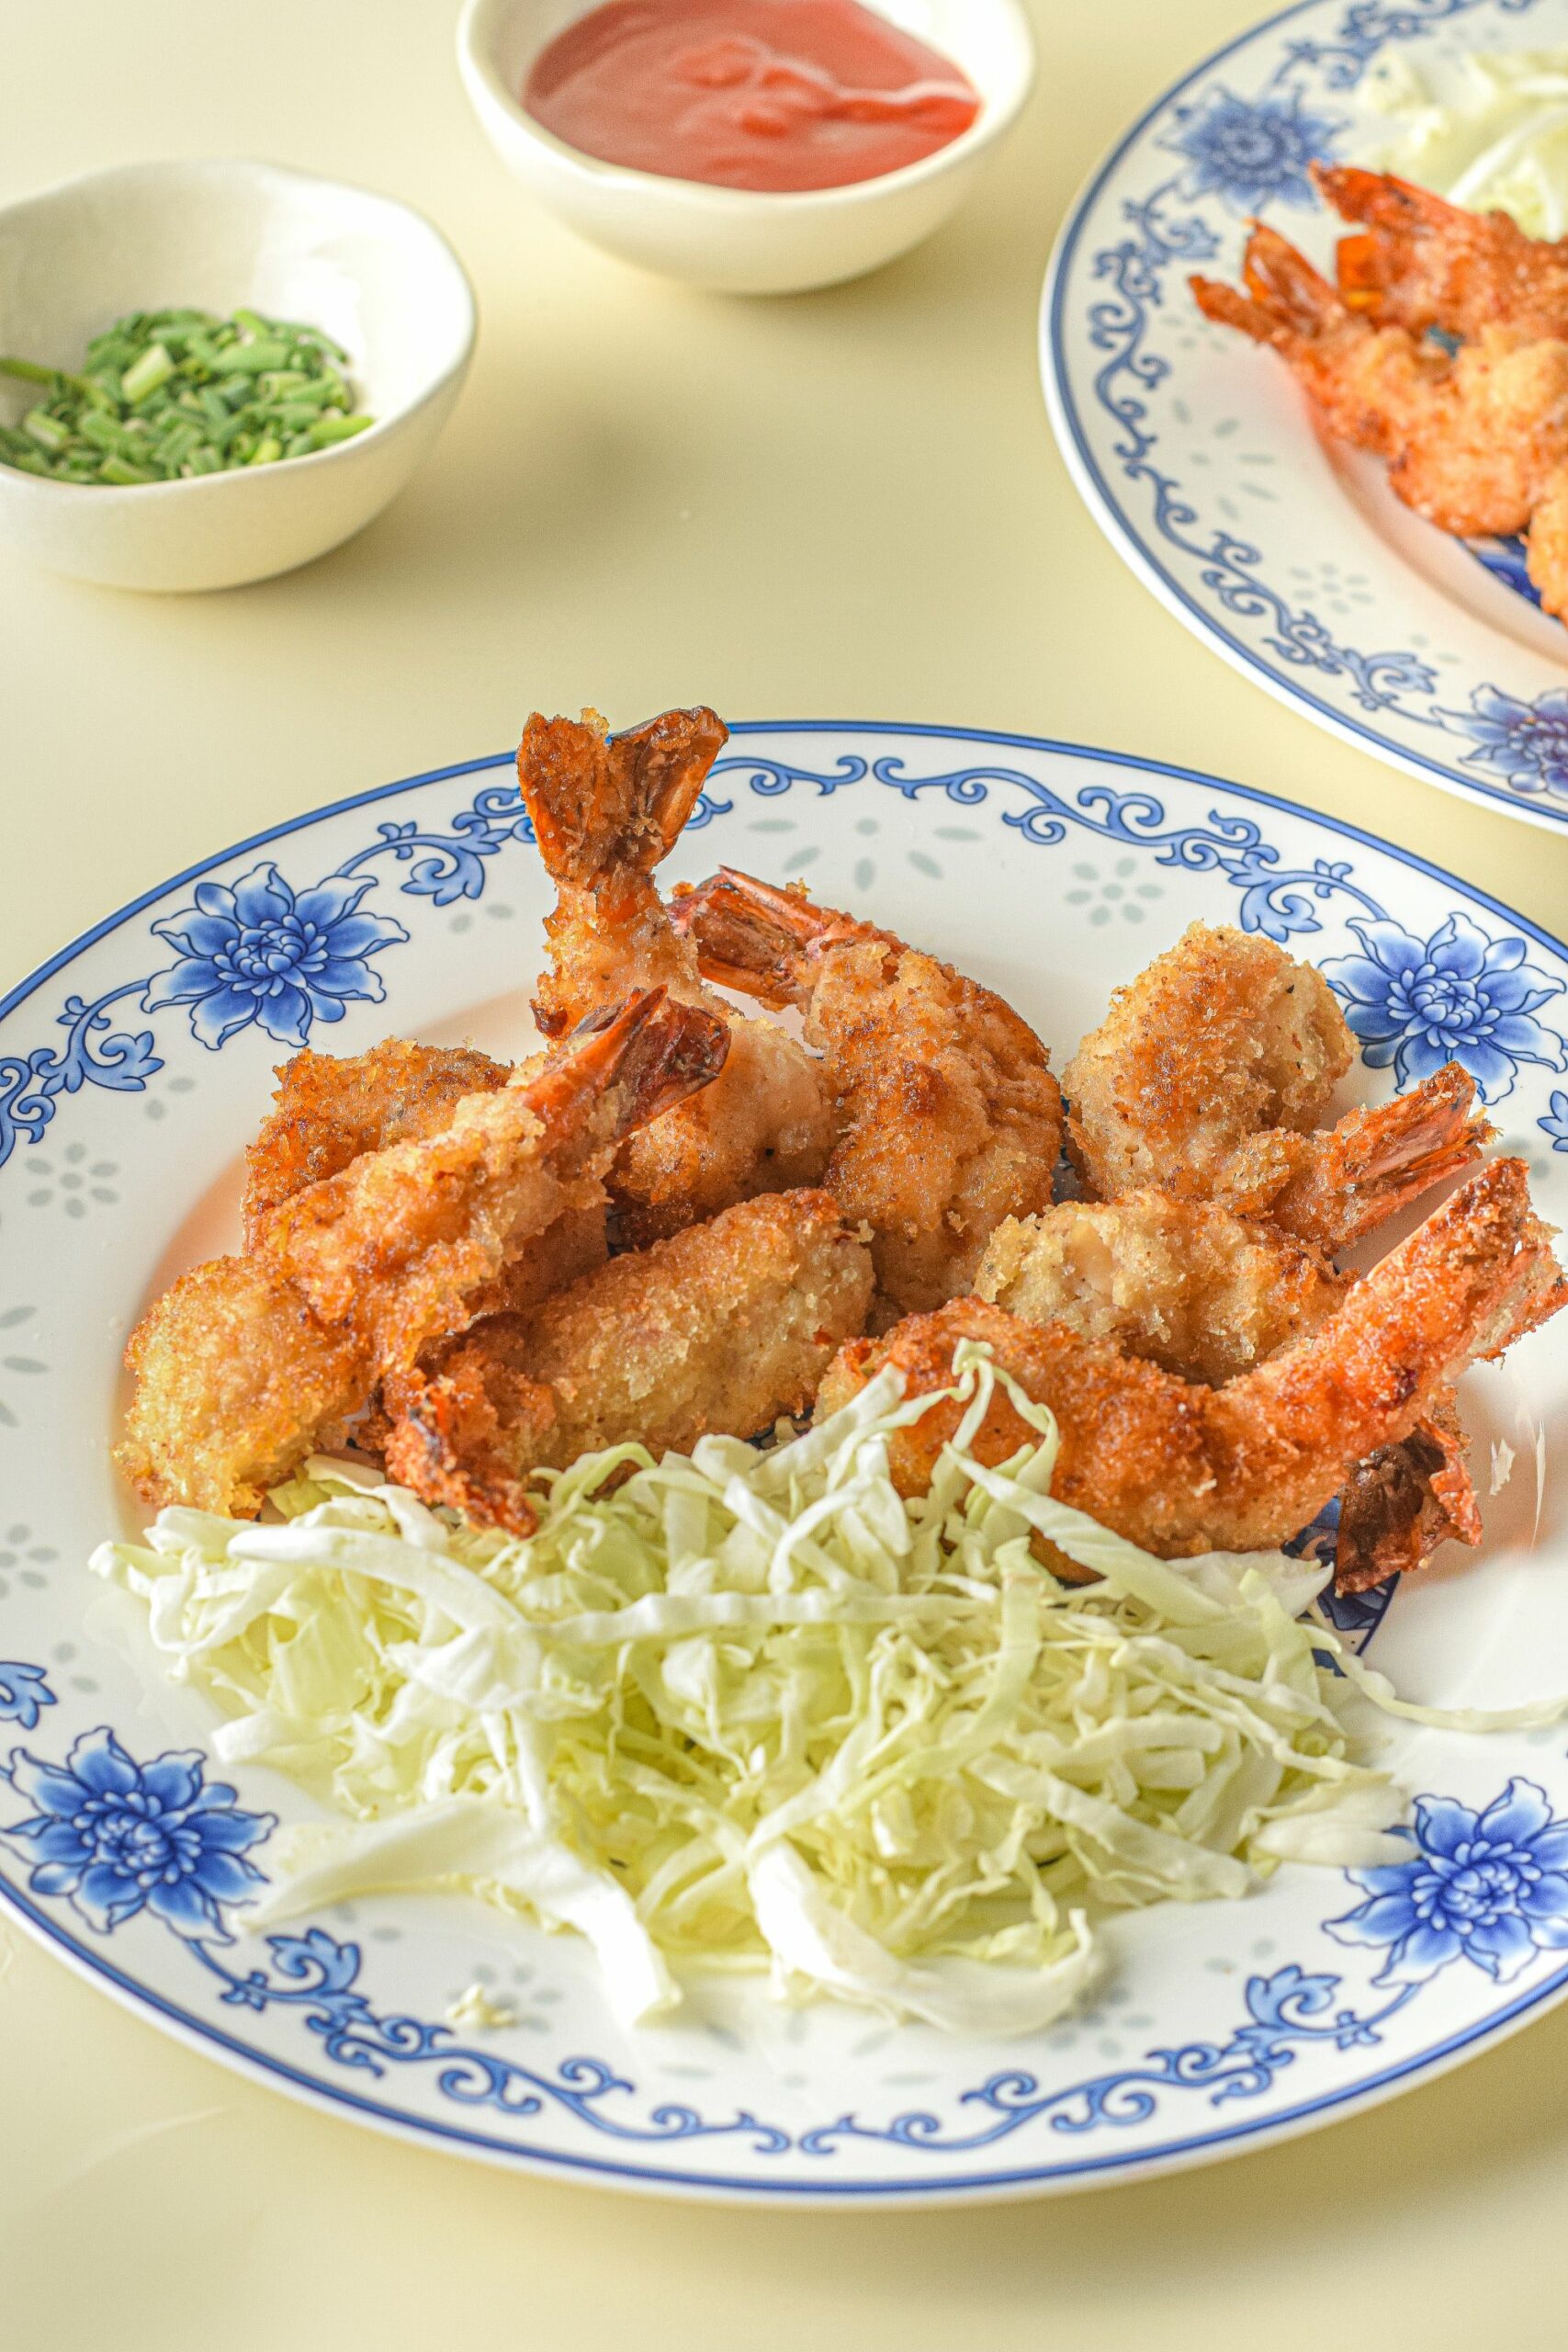 A dish of the shrimp with salad on the side.